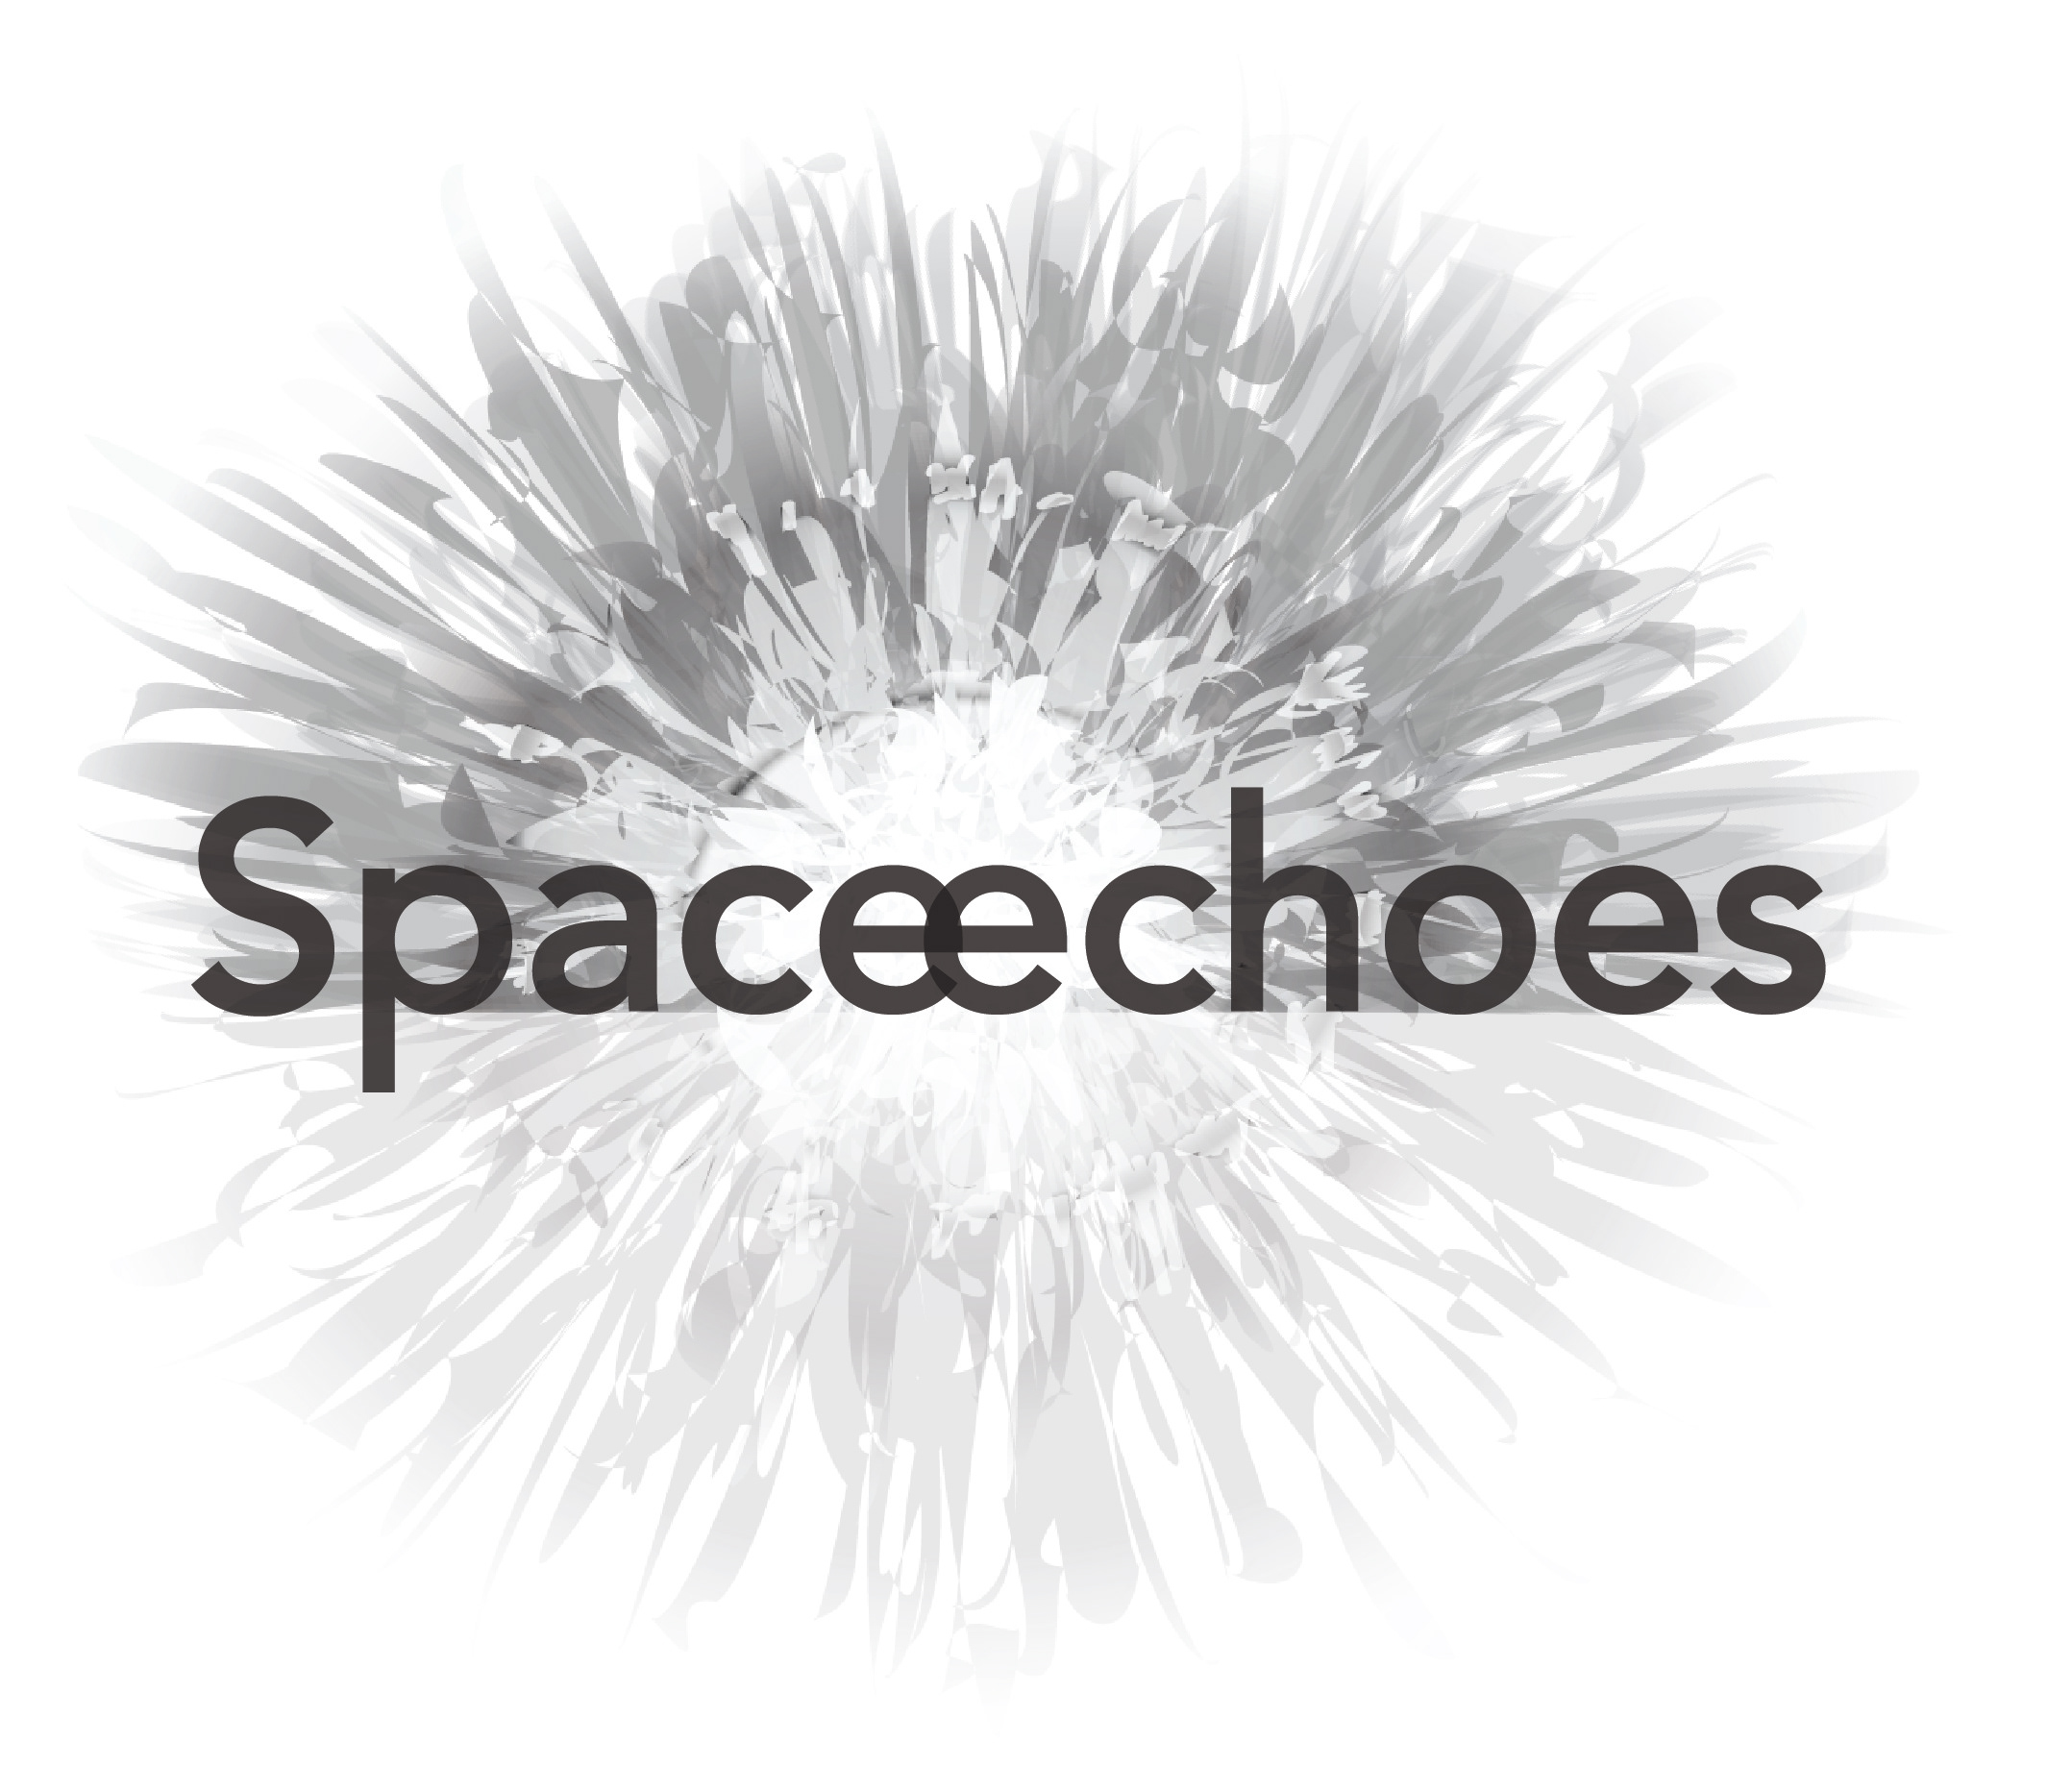 spaceechoes